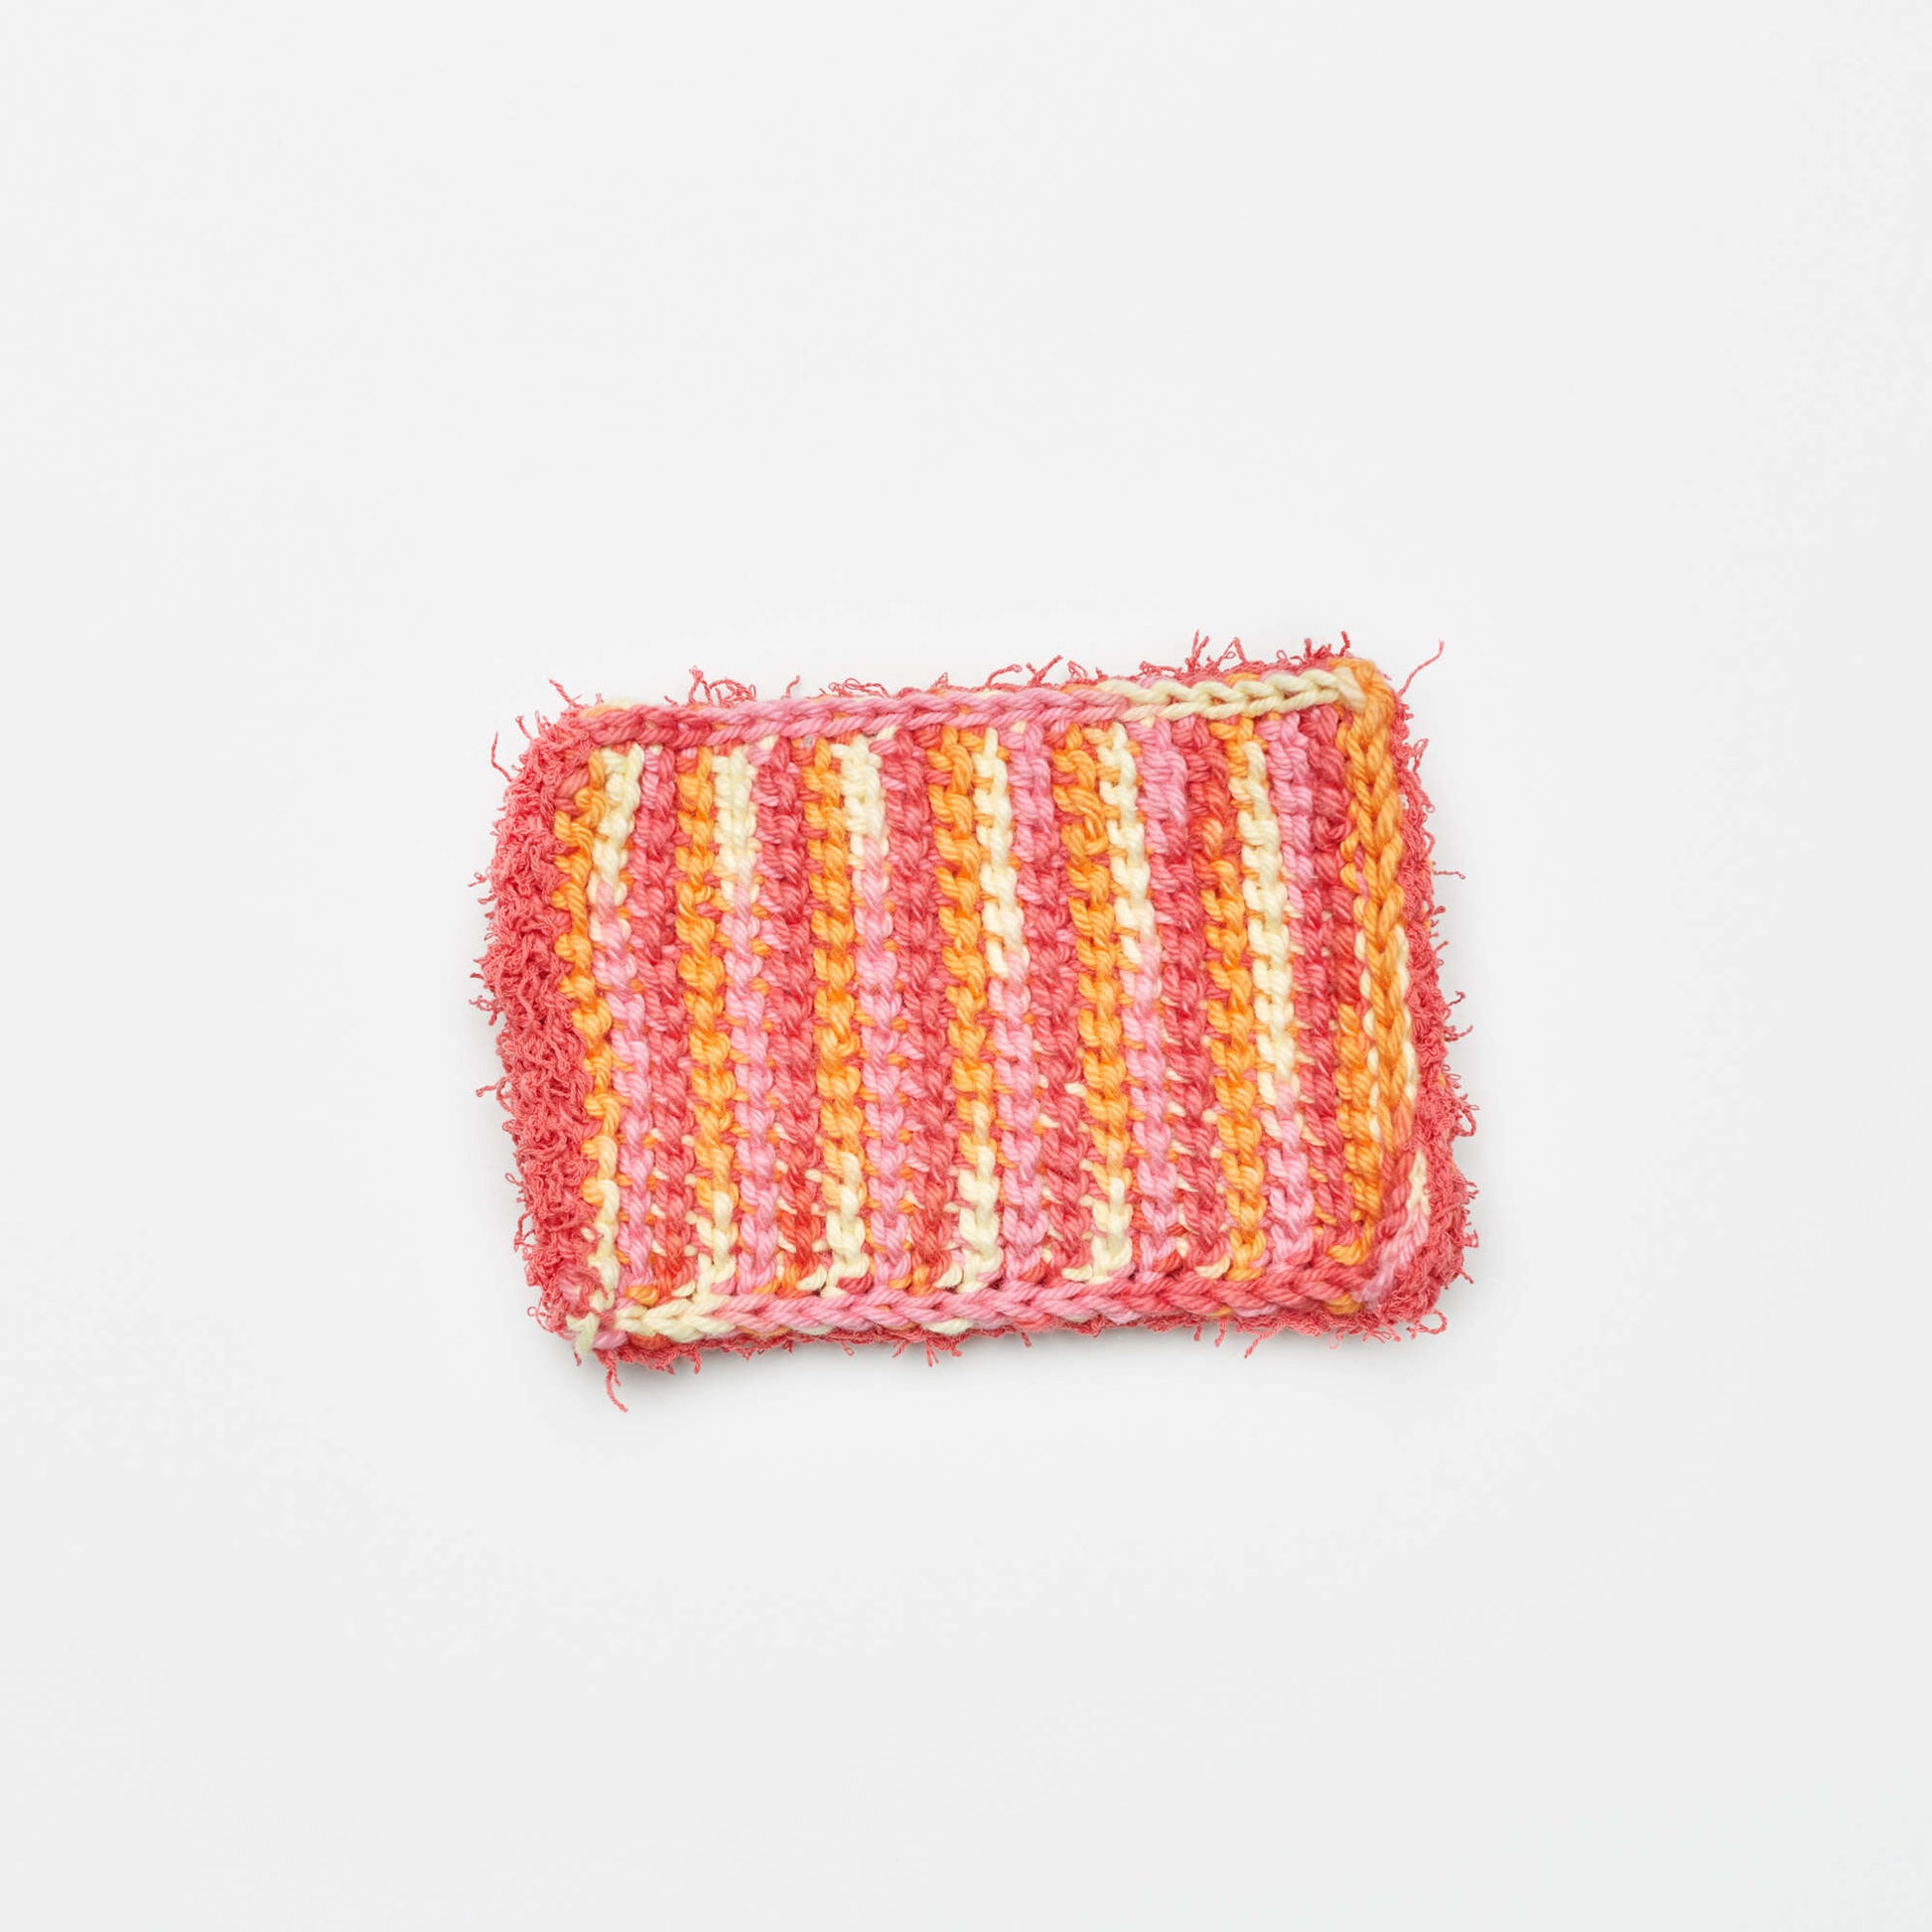 Free Red Heart Tunisian Two-Texture Scrubby Crochet Pattern